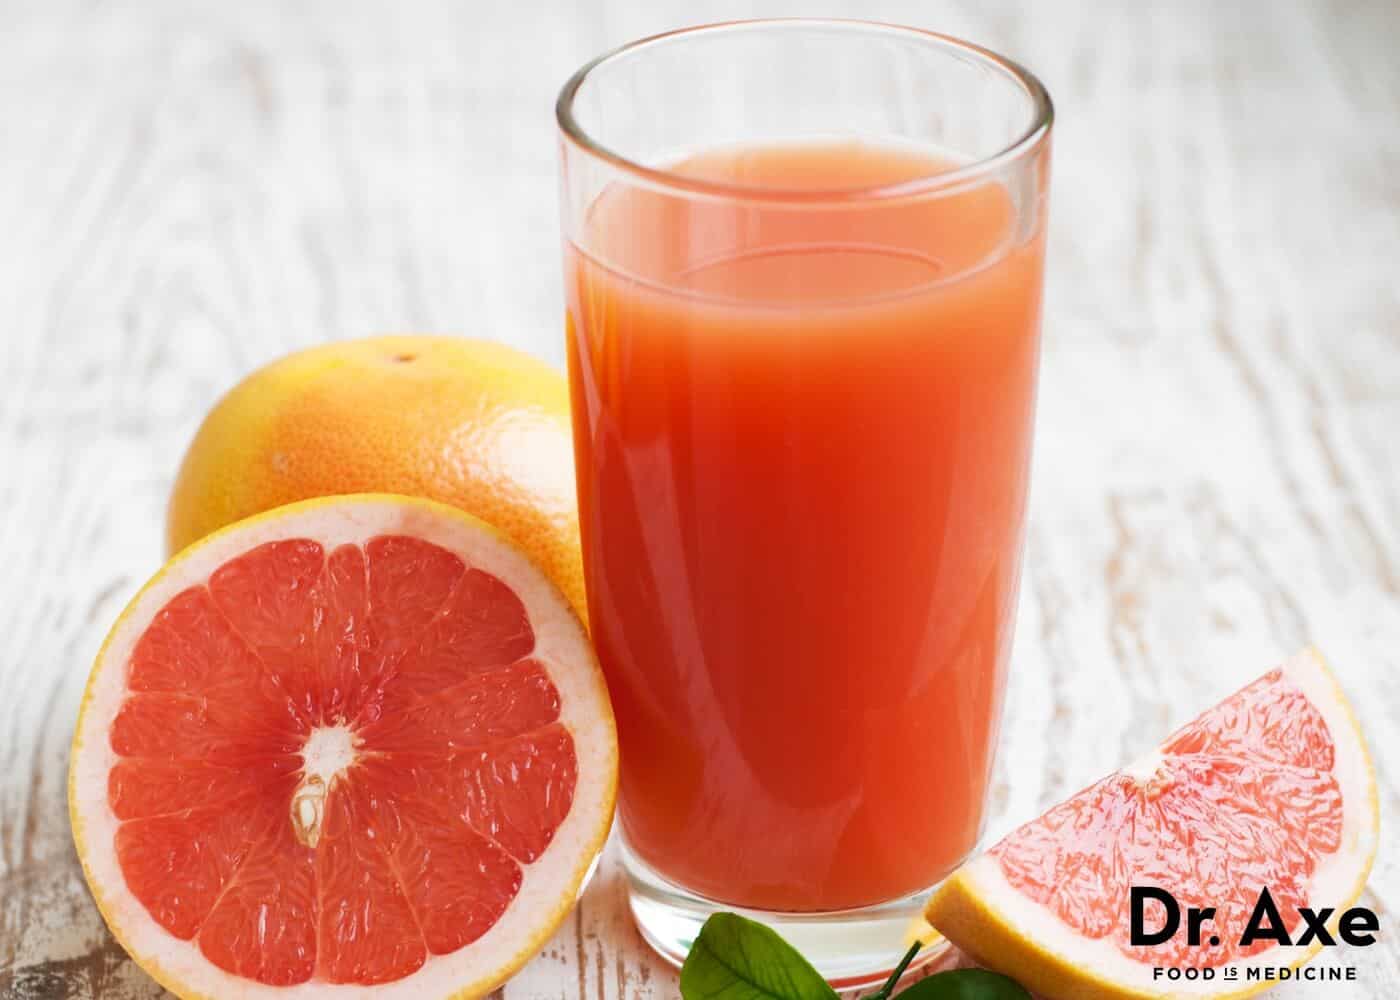 Weight Loss Juice Recipe - Dr. Axe